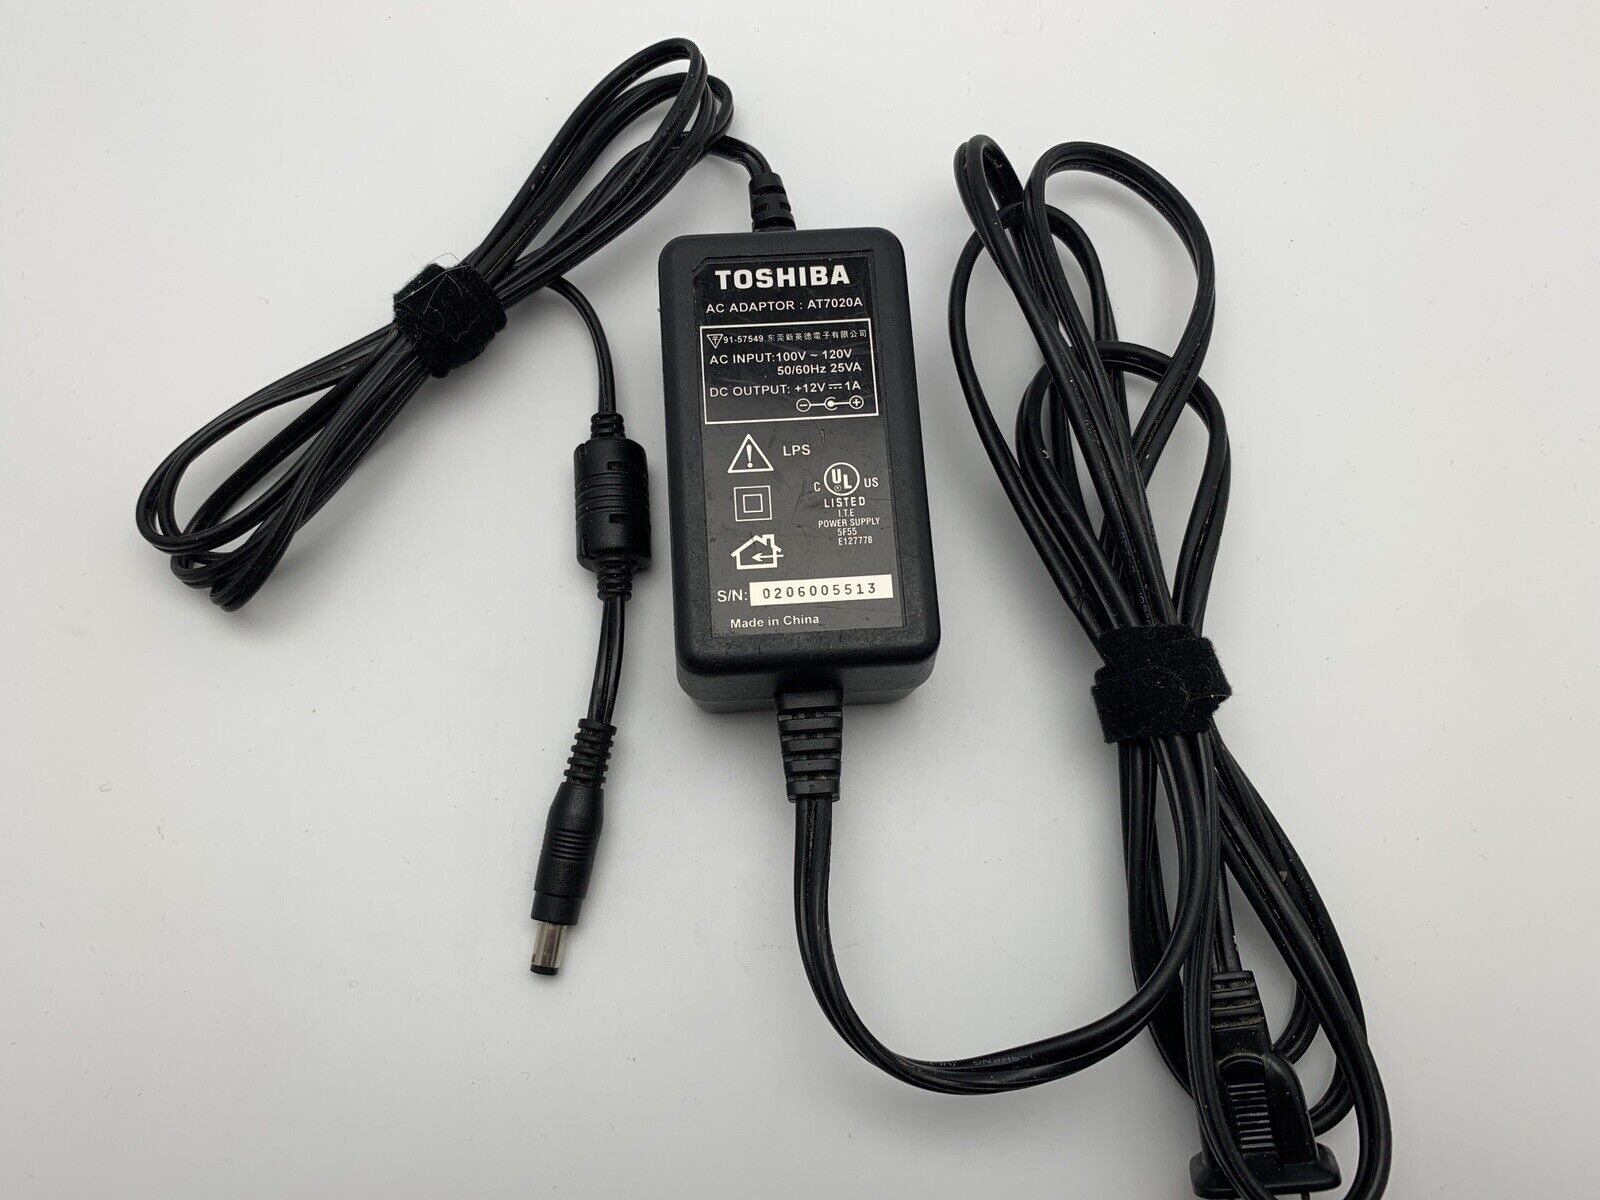 ✅ Genuine Toshiba AC/DC Adapter Power Supply Cord Charger AT7020A 12V 1A